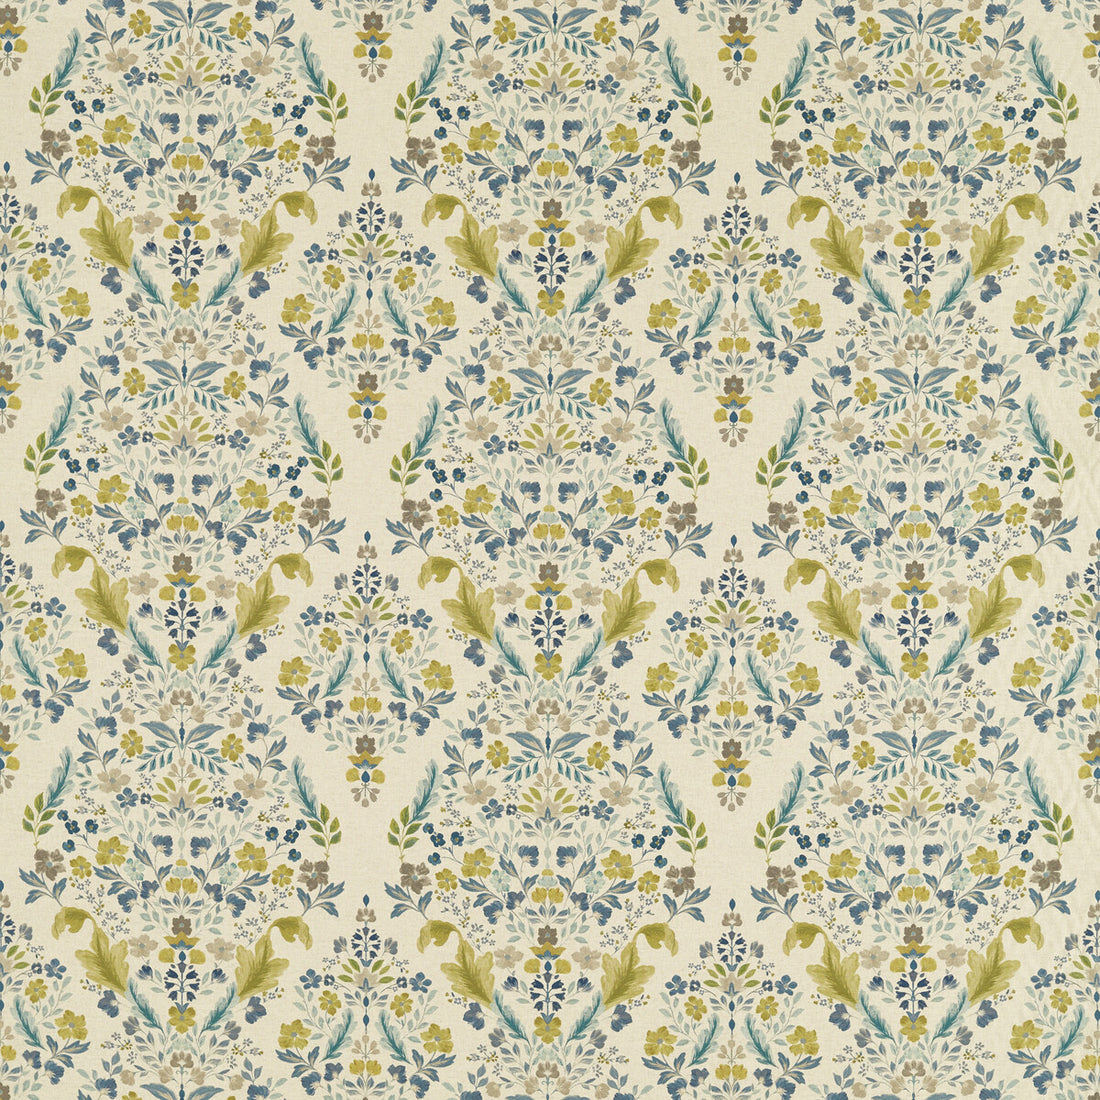 Gawthorpe fabric in mineral/linen color - pattern F1558/03.CAC.0 - by Clarke And Clarke in the Country Escape By Studio G For C&amp;C collection